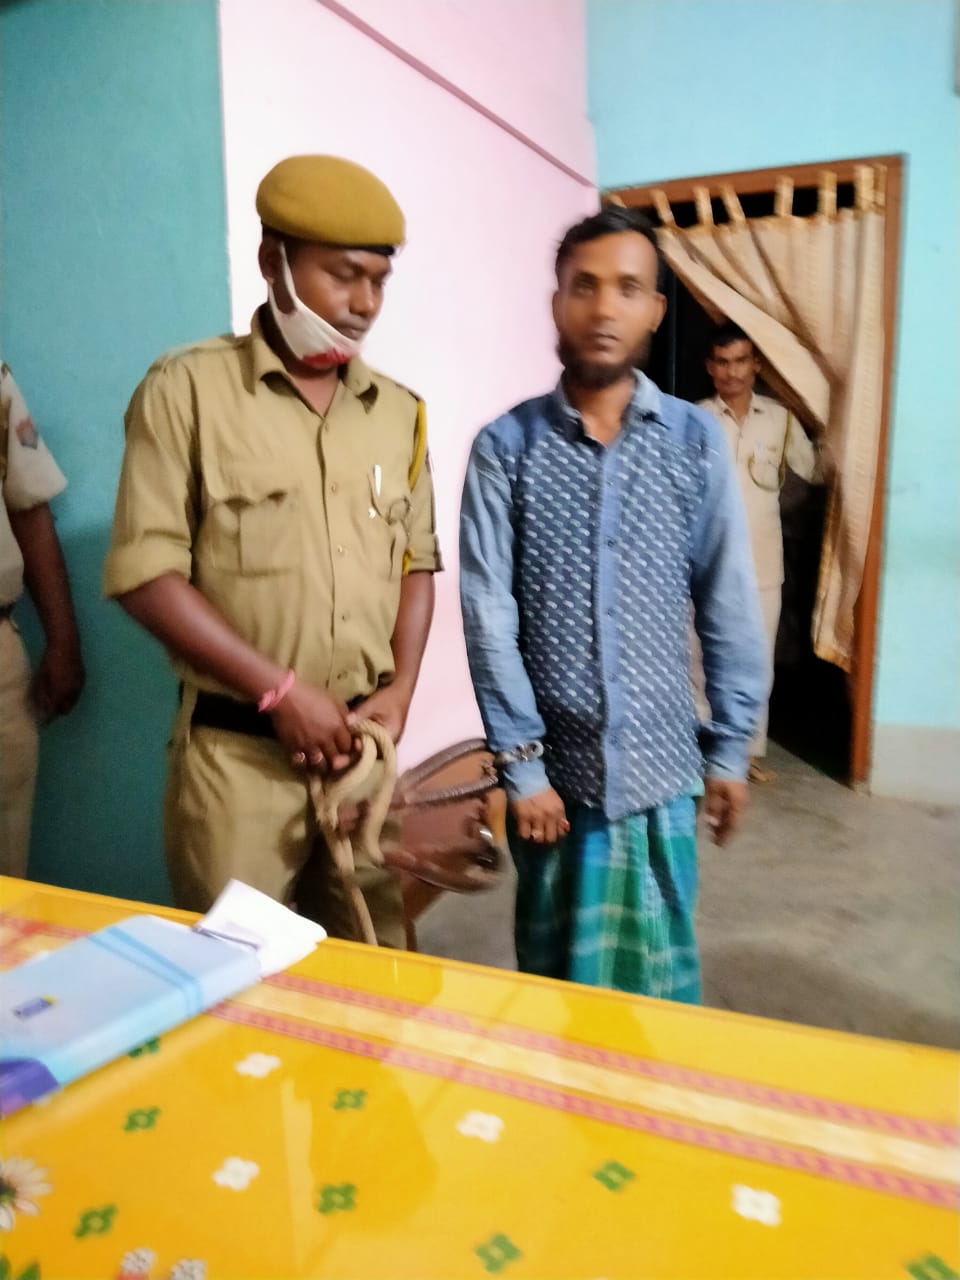 Udali police arrested the 5th man who is convicted of beheading a cow